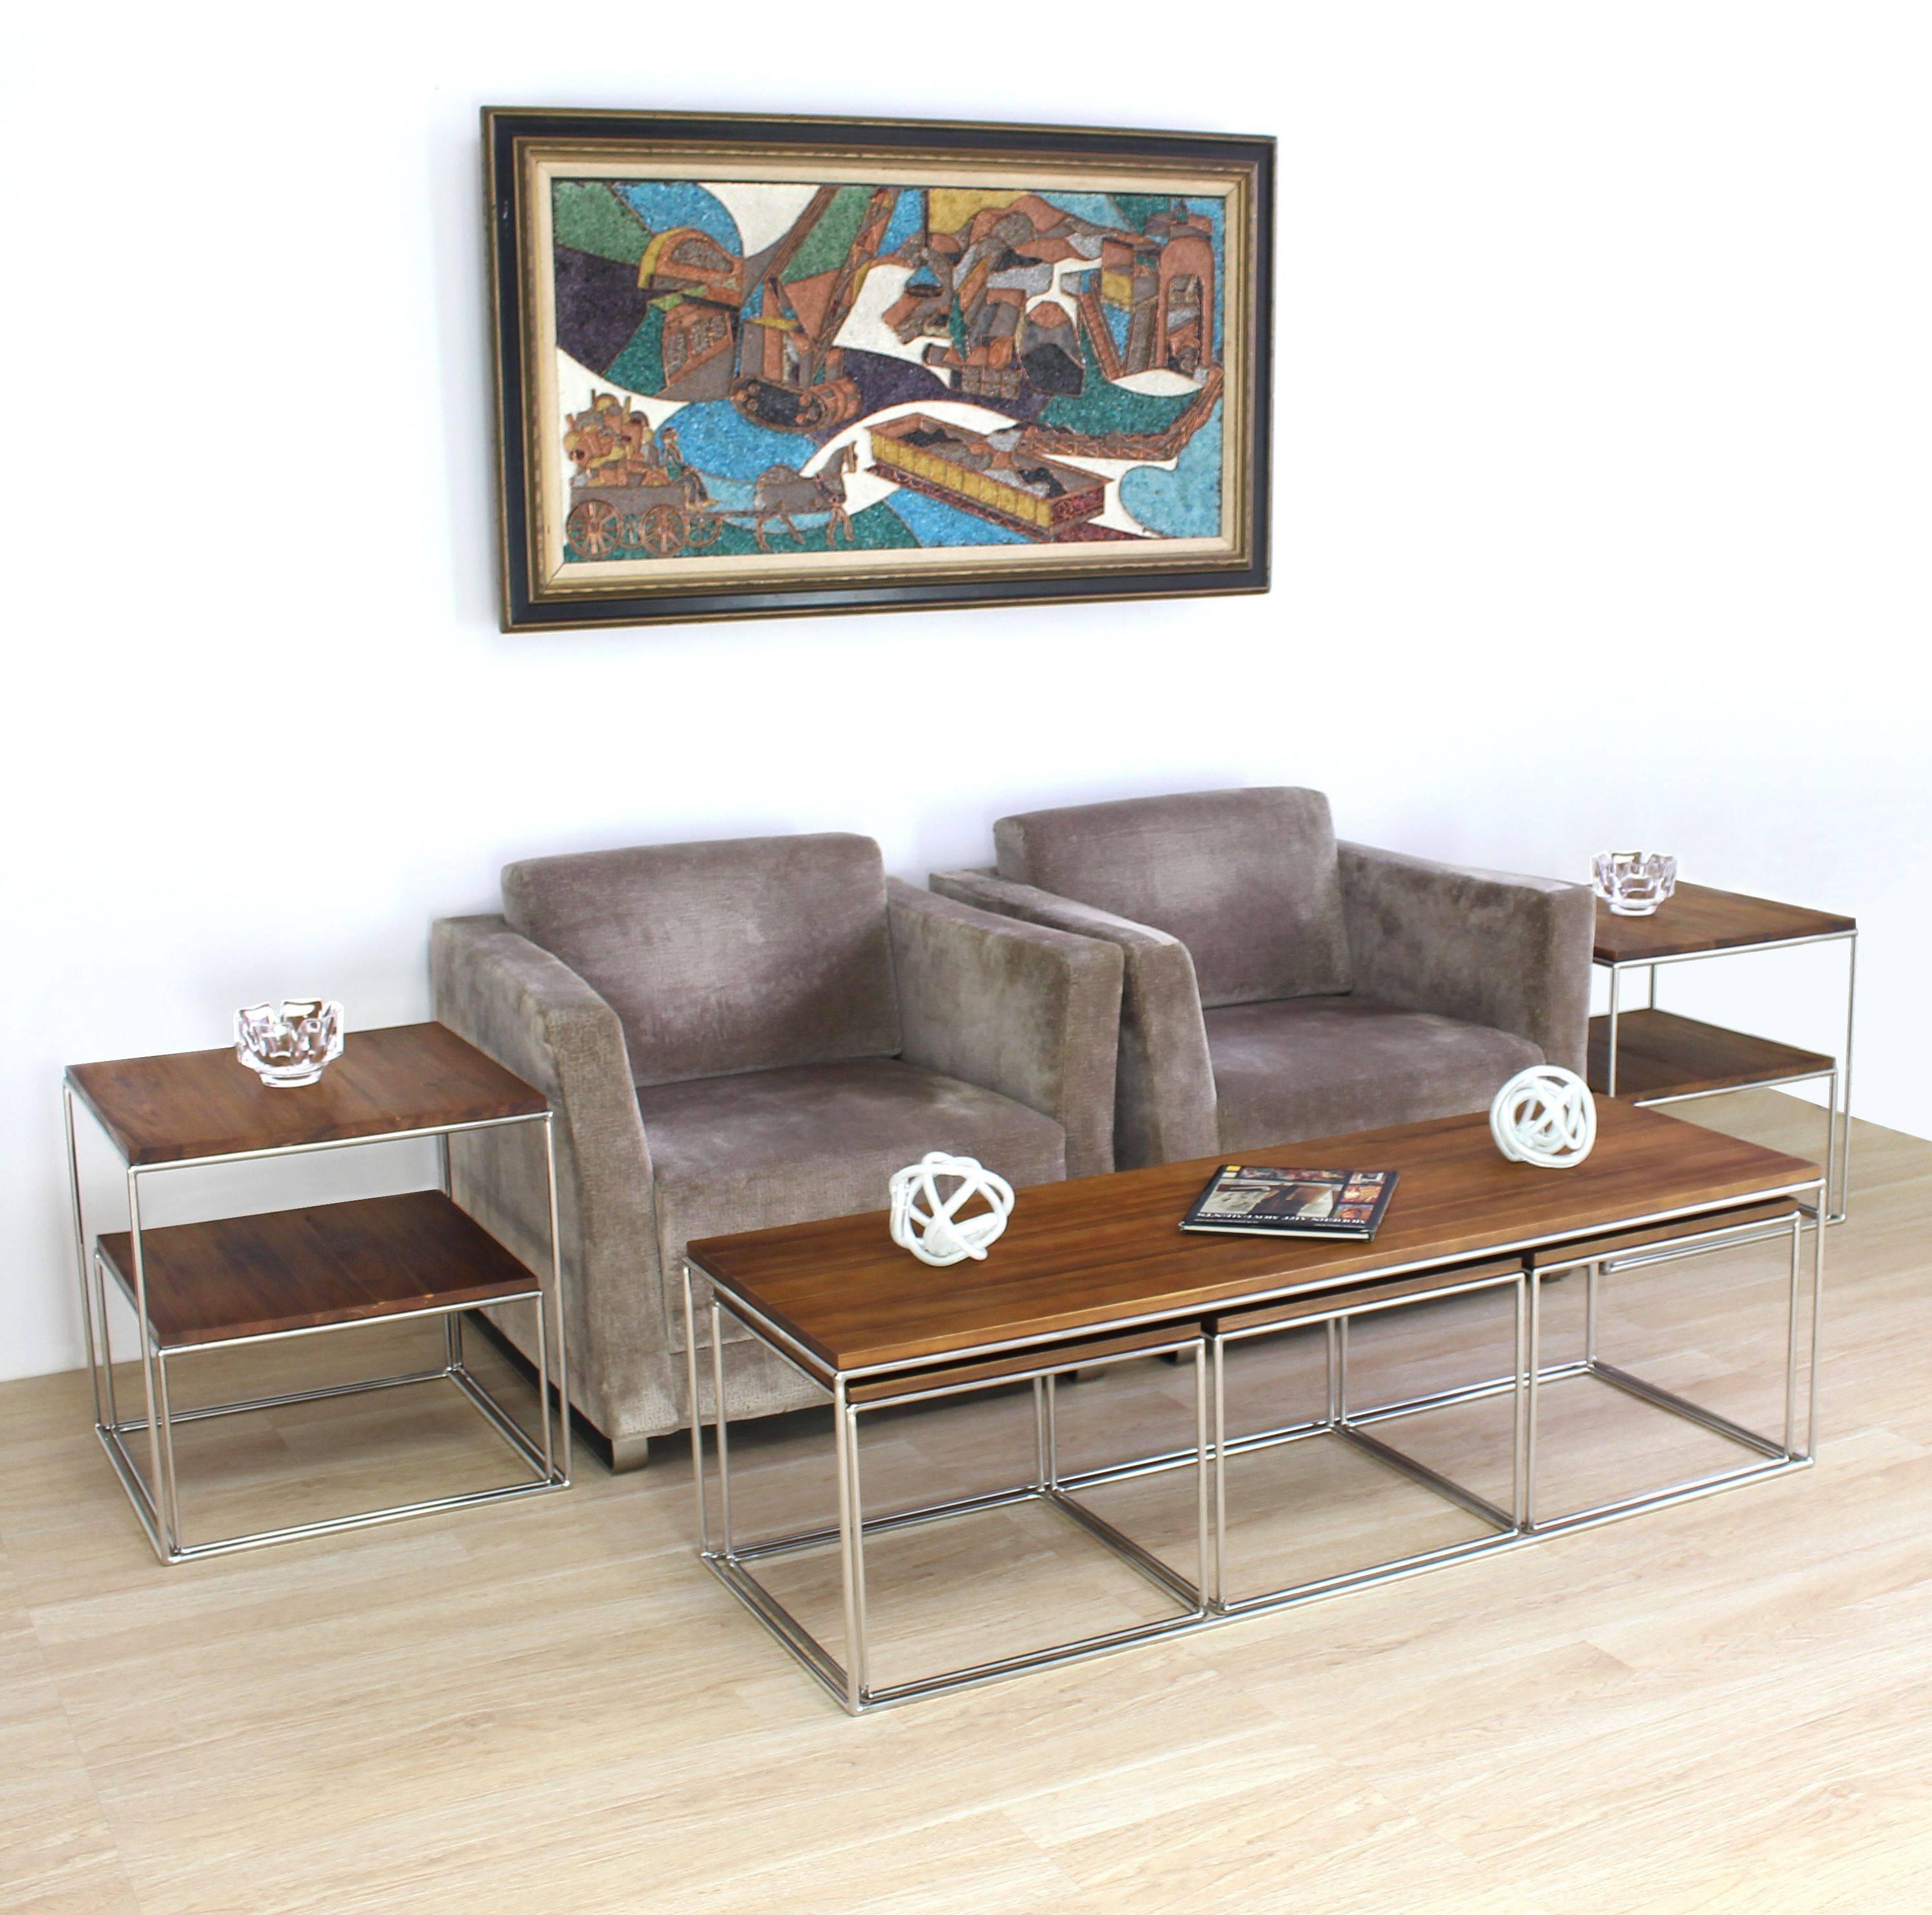 Box shaped set of 4 coffee tables by Established Lines. Mirror polished solid stainless steel rod frame bases coffee table with three 18 x 18 x 15 cube shape nesting tables.
The elegant design four pieces table features countless functions and